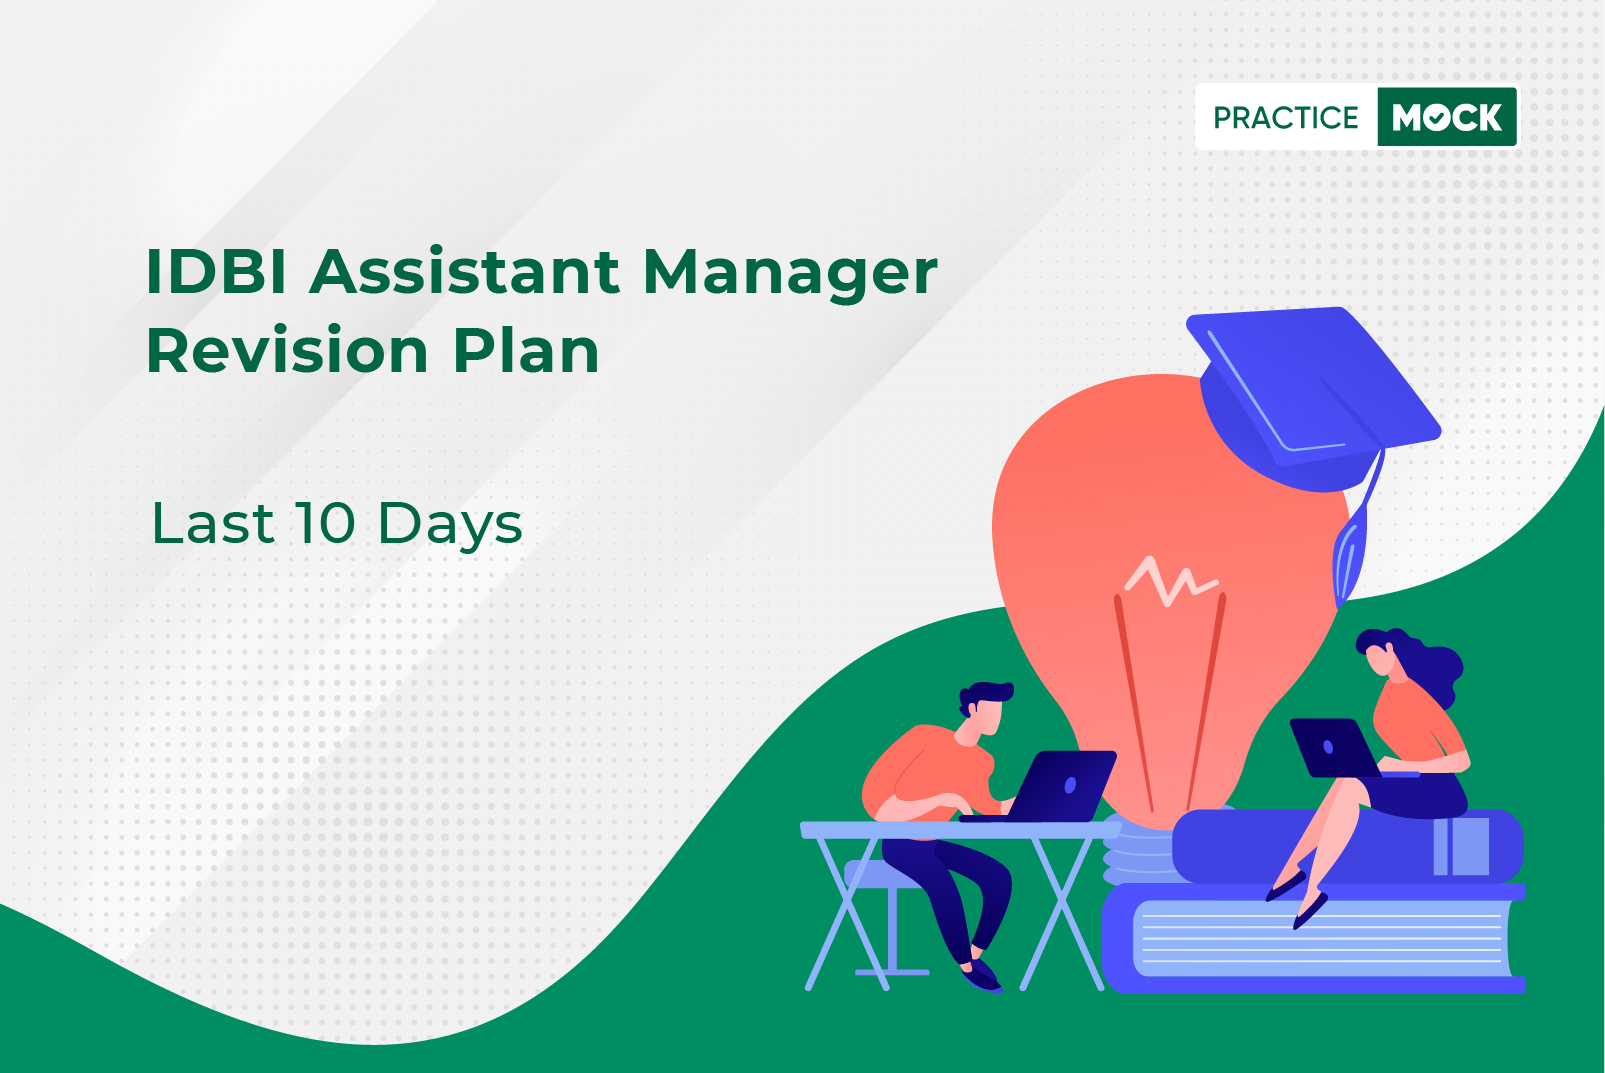 IDBI Assistant Manager Revision Plan Last 10 Days